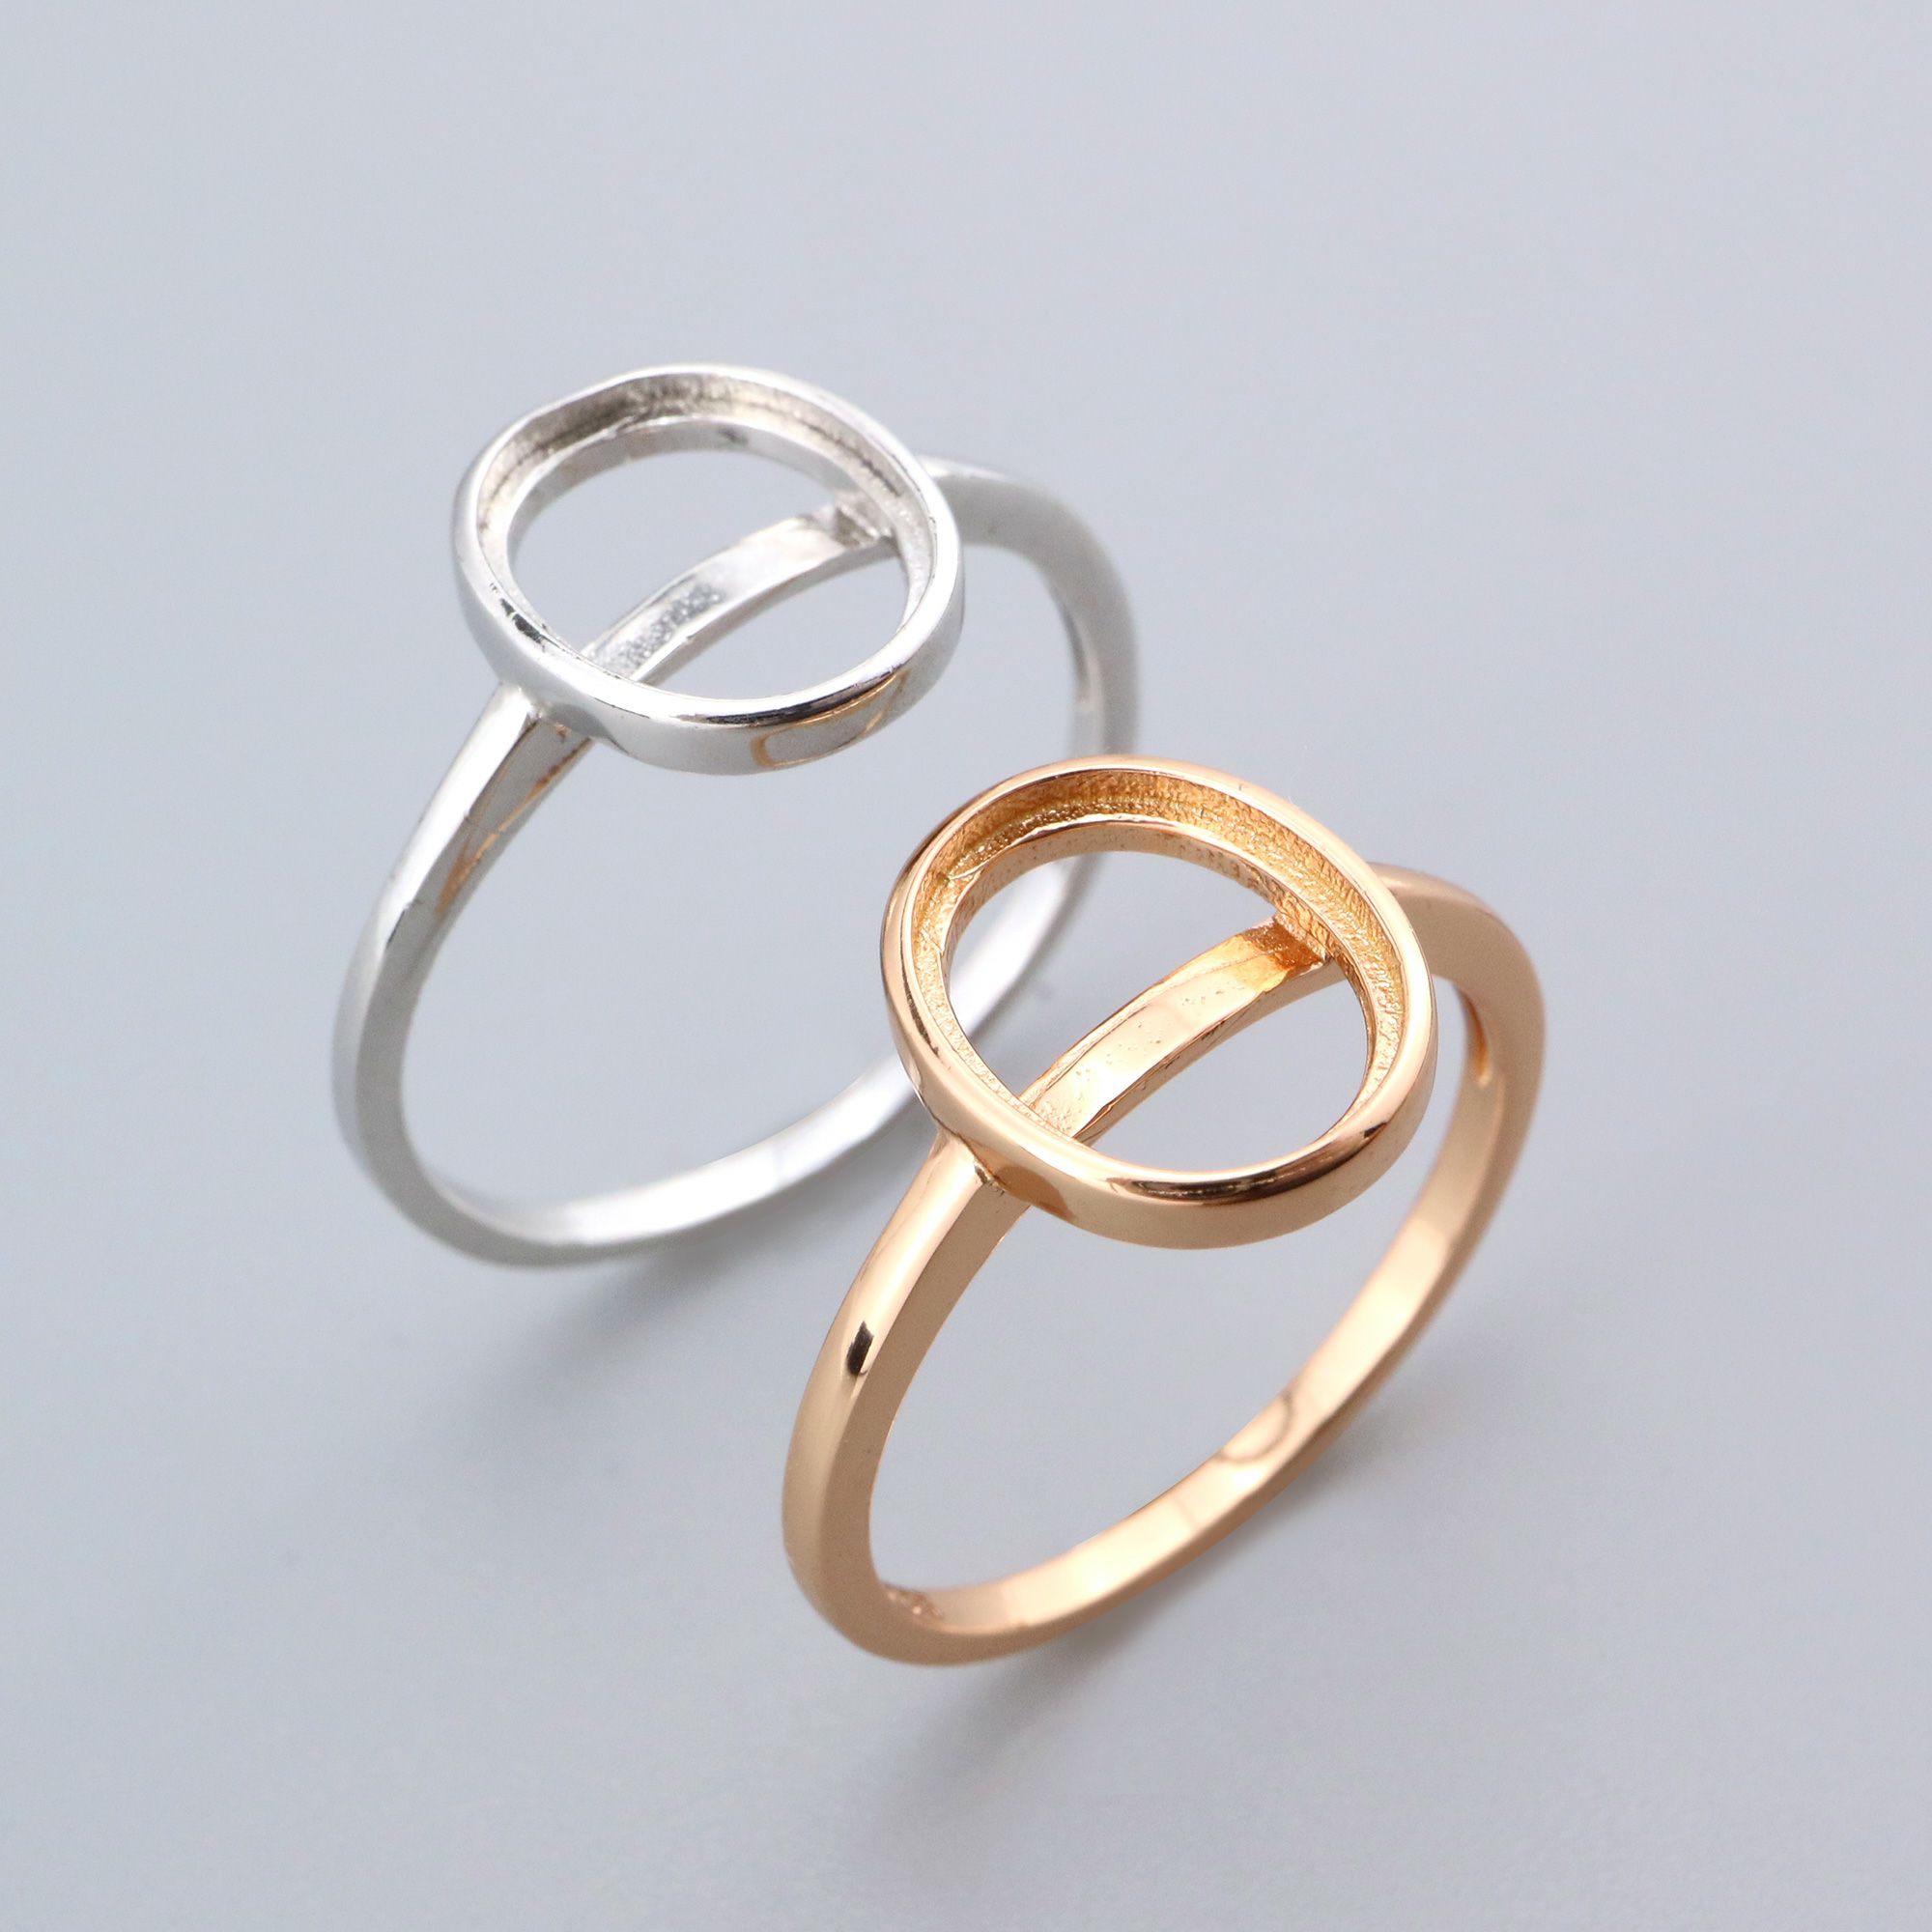 8x10MM Oval Ring Settings Solid 925 Sterling Silver Rose Gold Plated Set Size DIY Ring Bezel for Cabochon Gemstone Supplies 1224080 - Click Image to Close